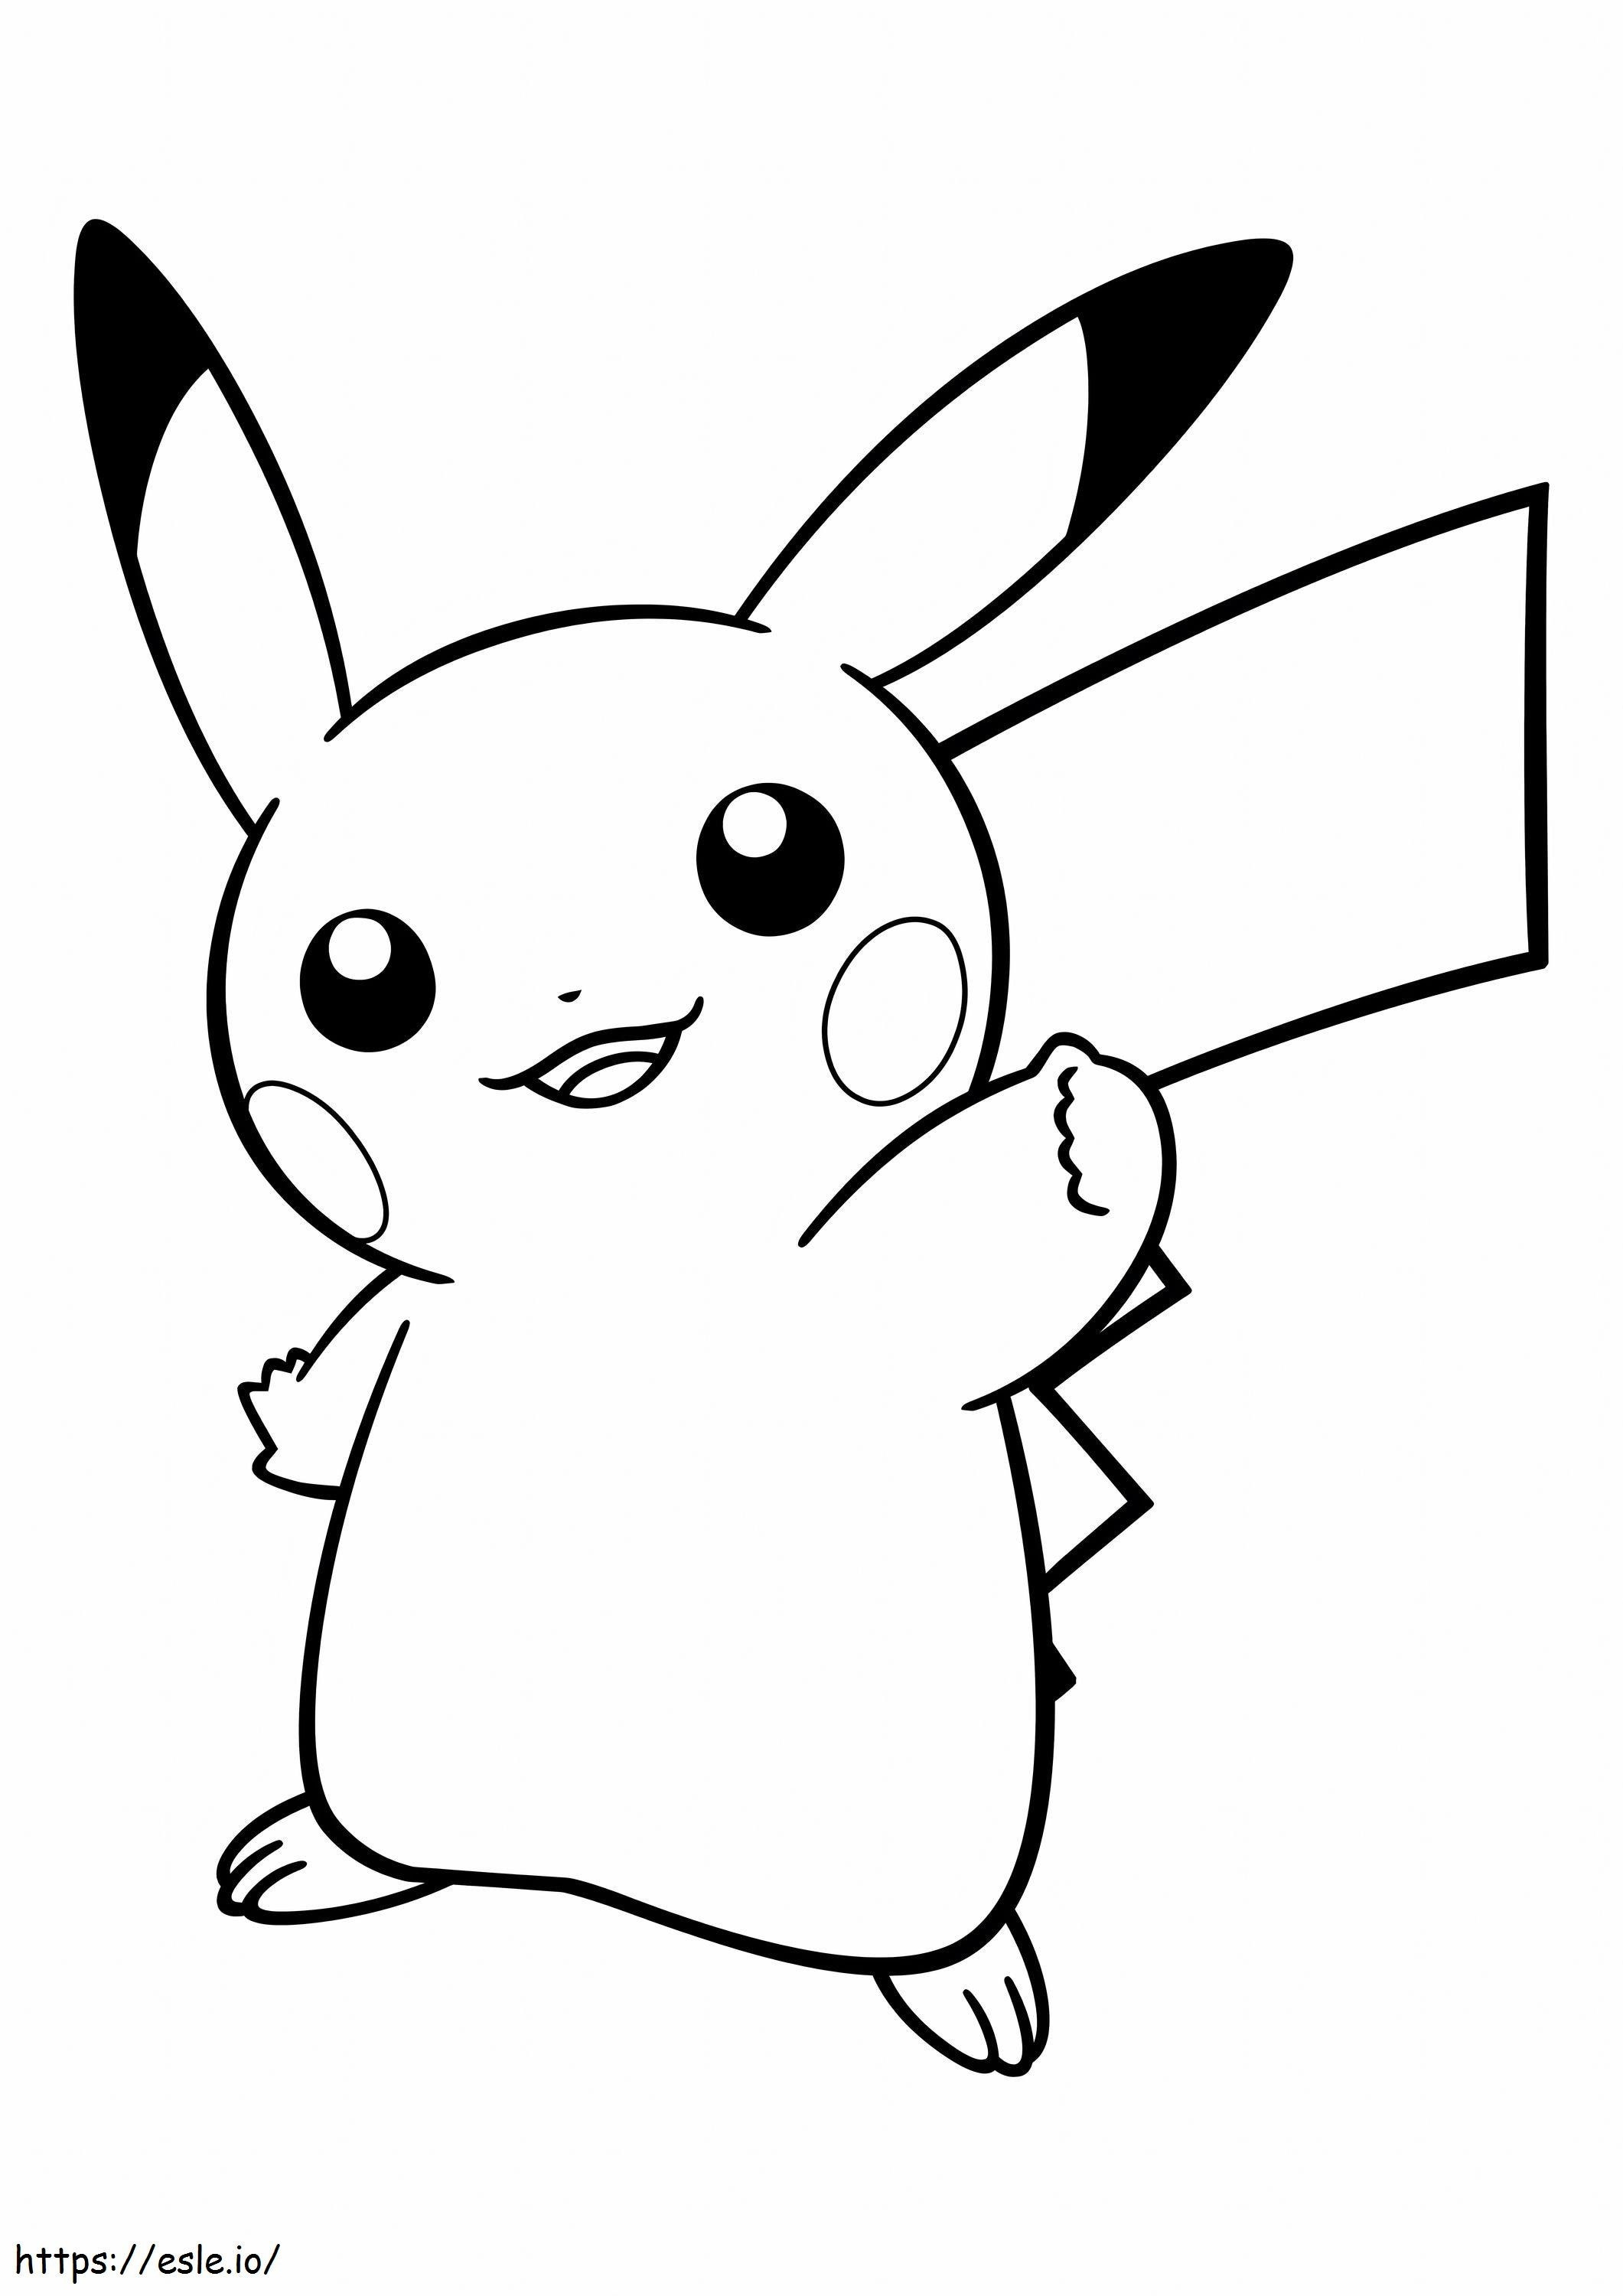 Funny Pikachu coloring page